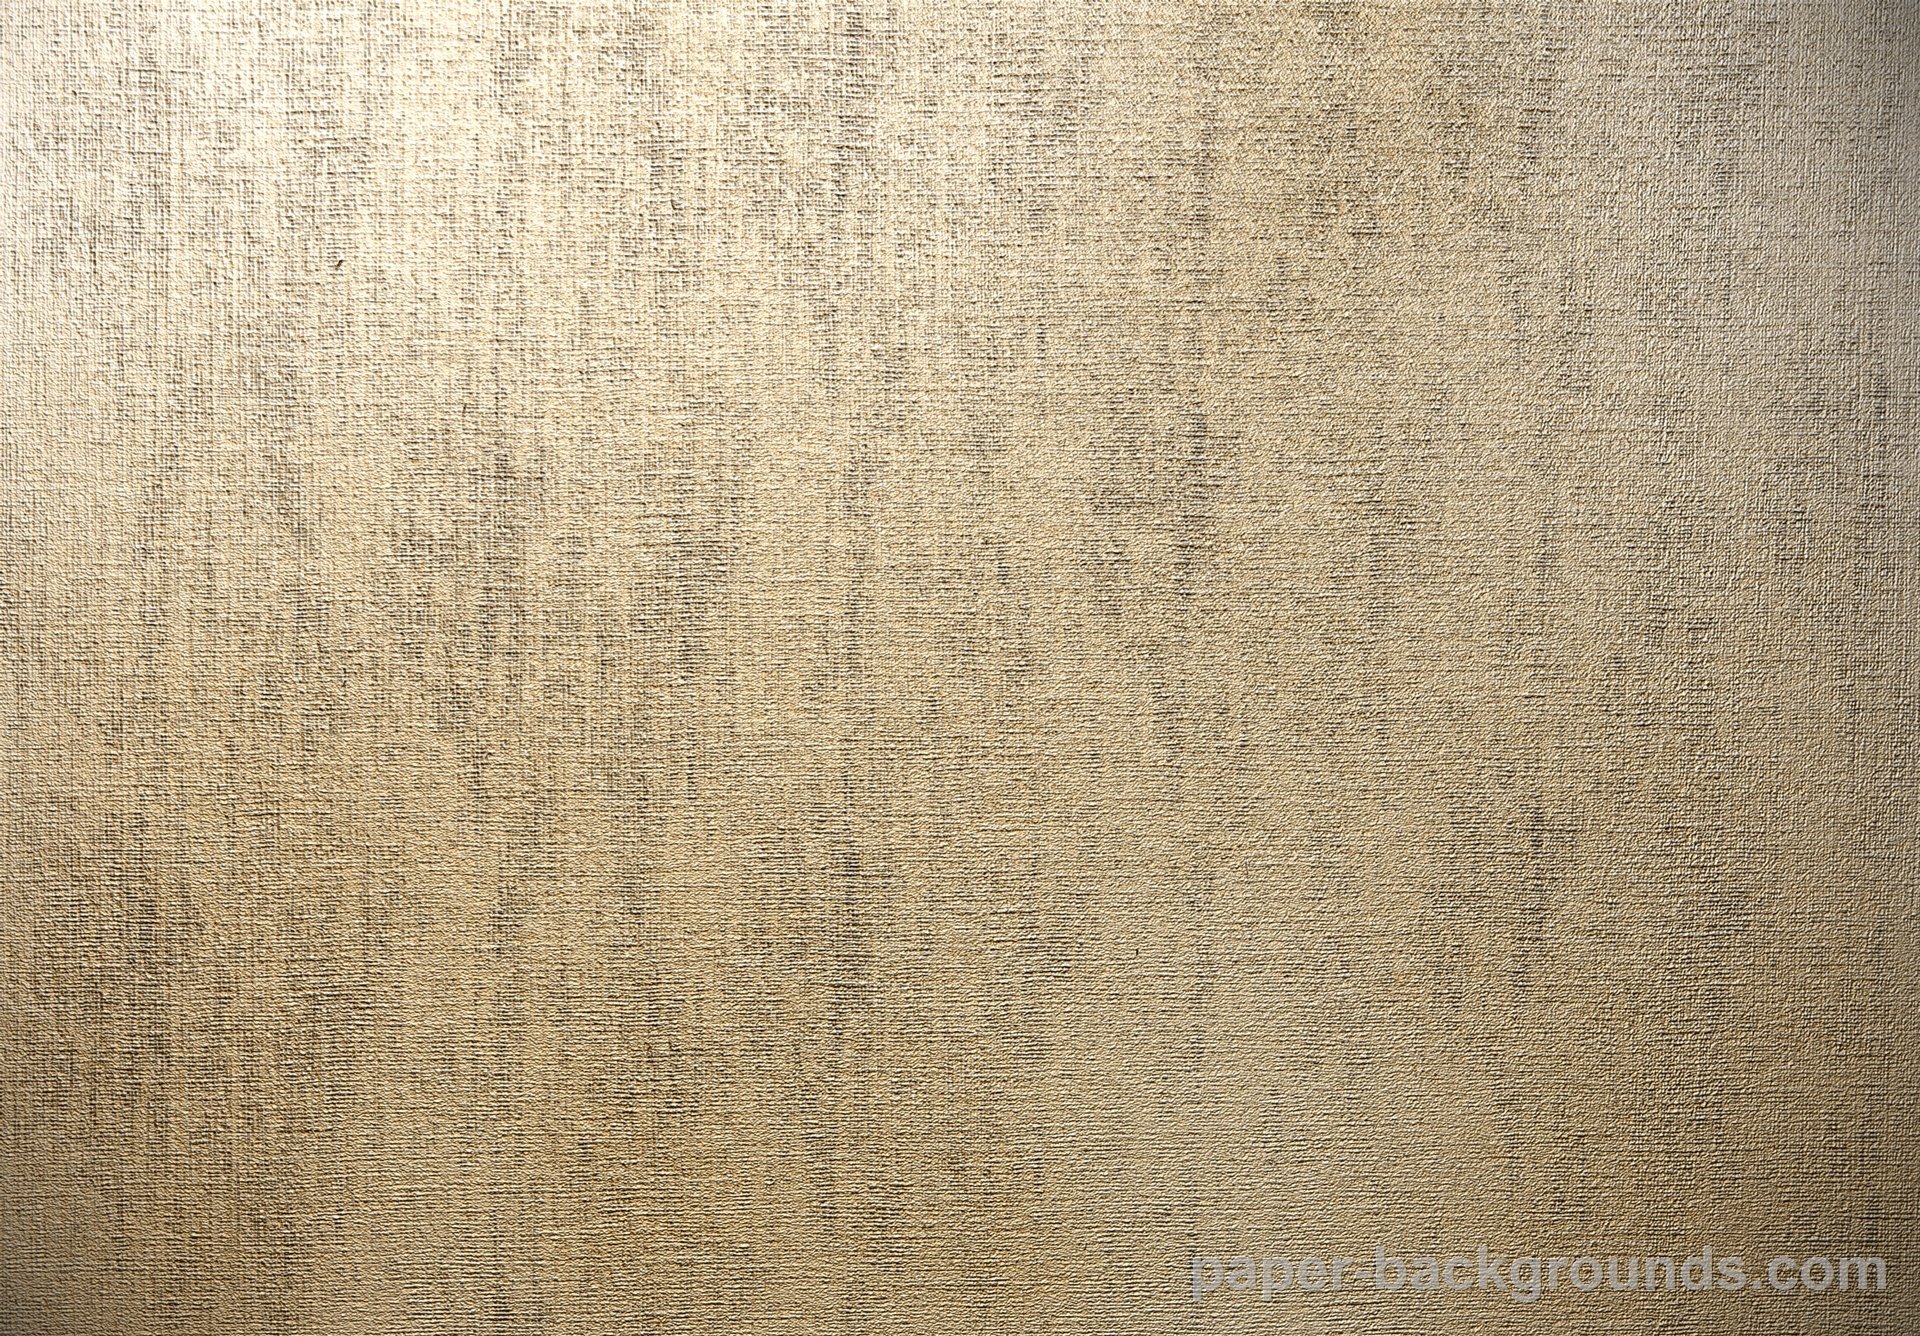  brown grunge texture background paper backgrounds hd wallpaper